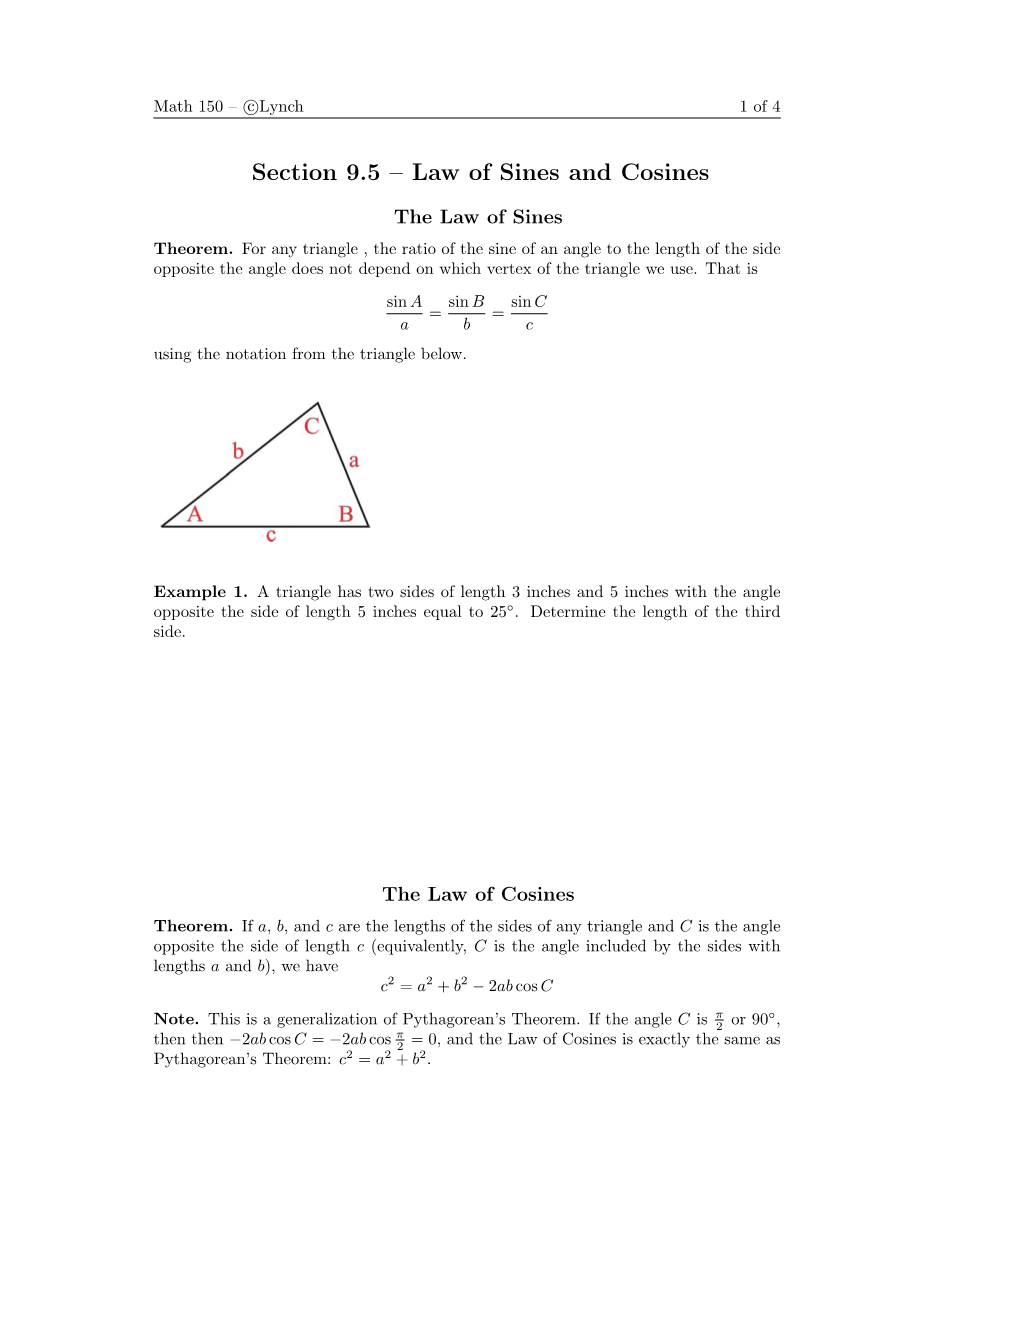 Section 9.5 – Law of Sines and Cosines